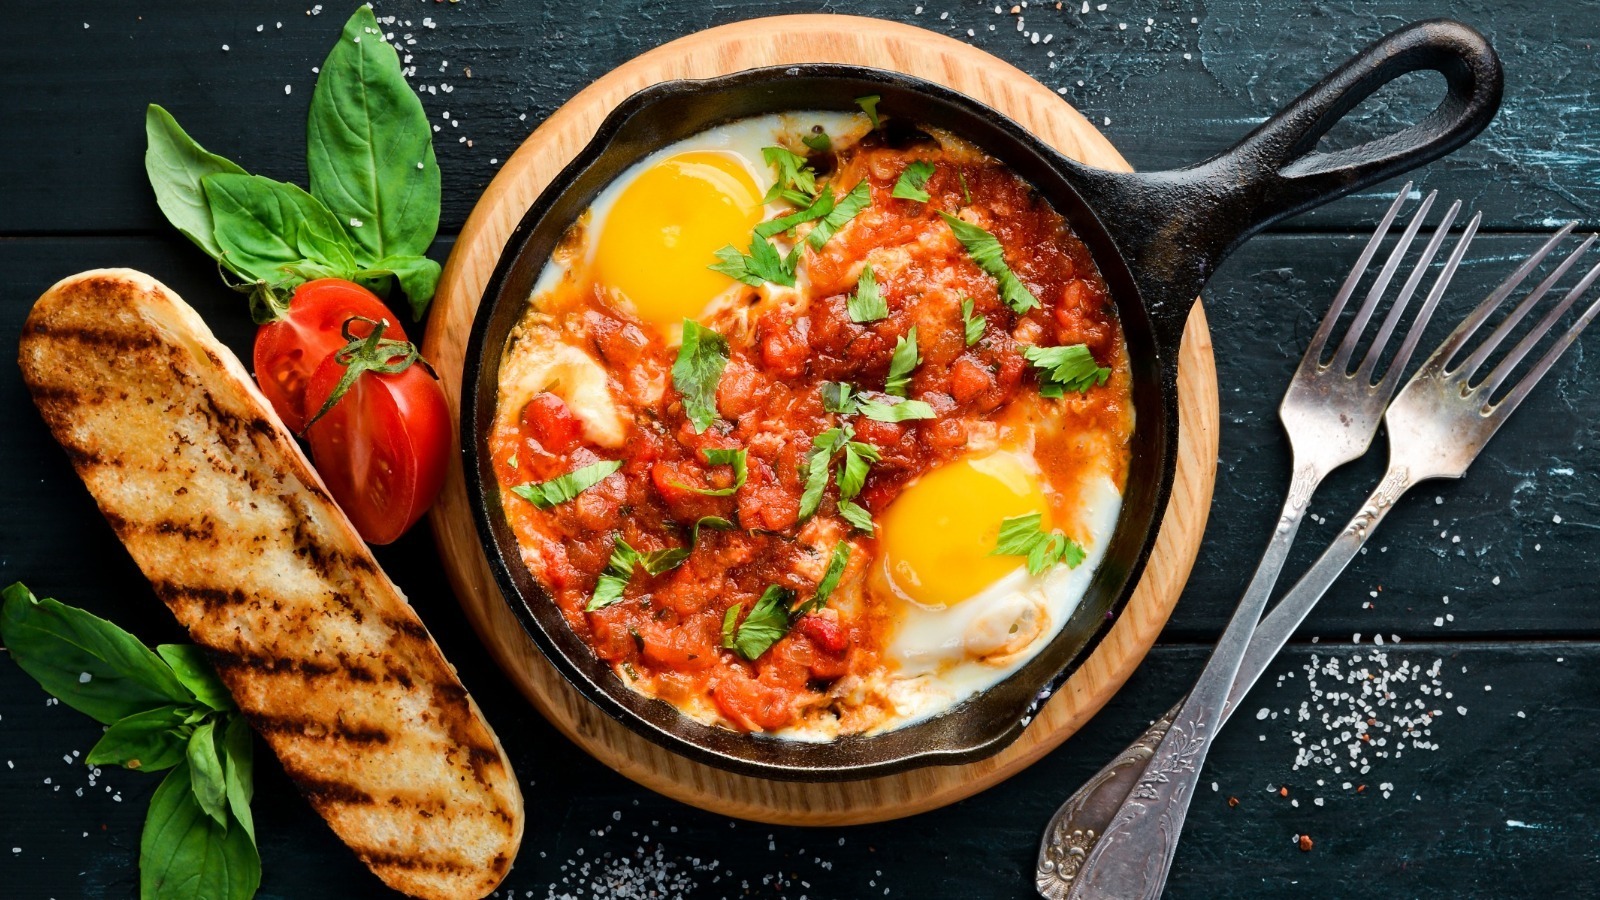 Where Did Shakshuka Really Come From?